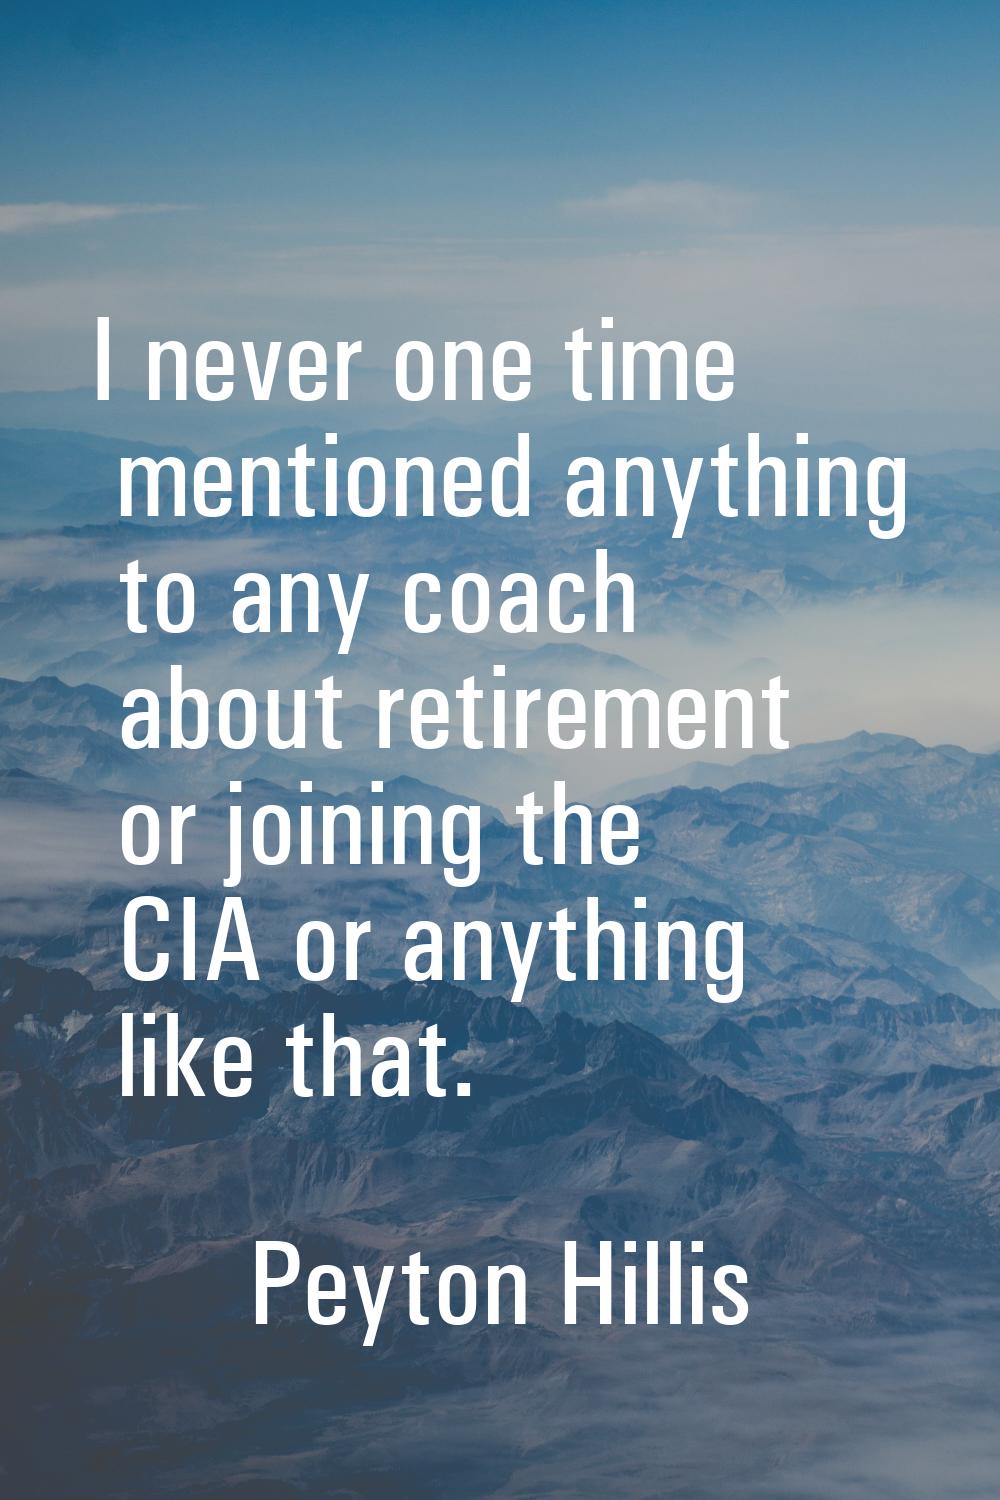 I never one time mentioned anything to any coach about retirement or joining the CIA or anything li